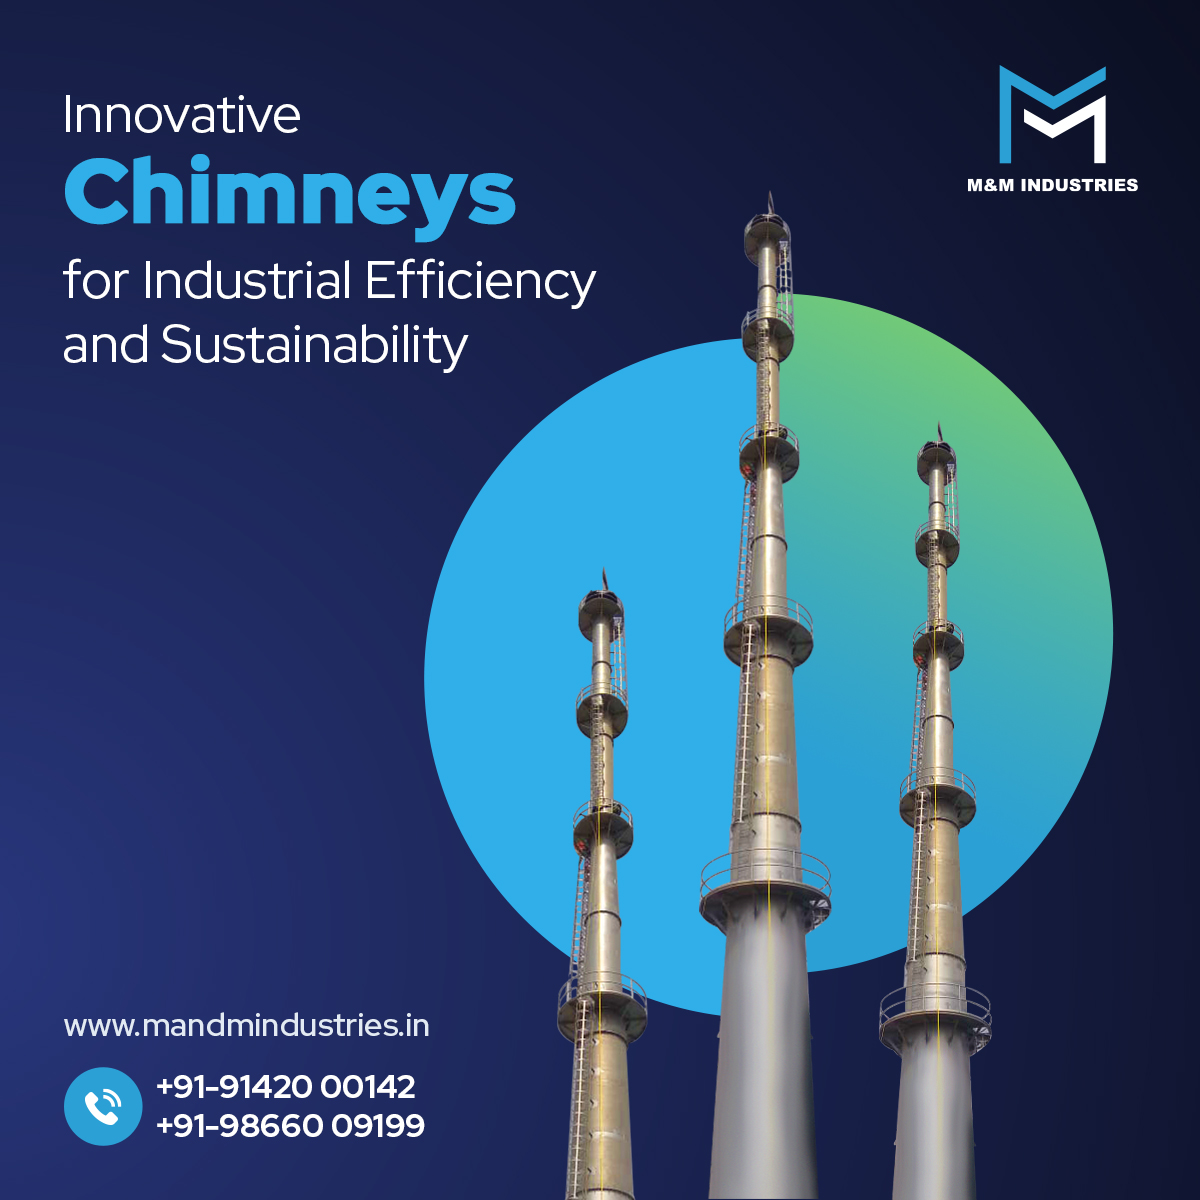 Reaching new heights with our chimneys! Our chimneys are designed to be efficient, durable, and environmentally friendly, providing reliable solutions for your industrial needs.

#Chimneys #IndustrialSolutions #Efficiency #Durability #Sustainability